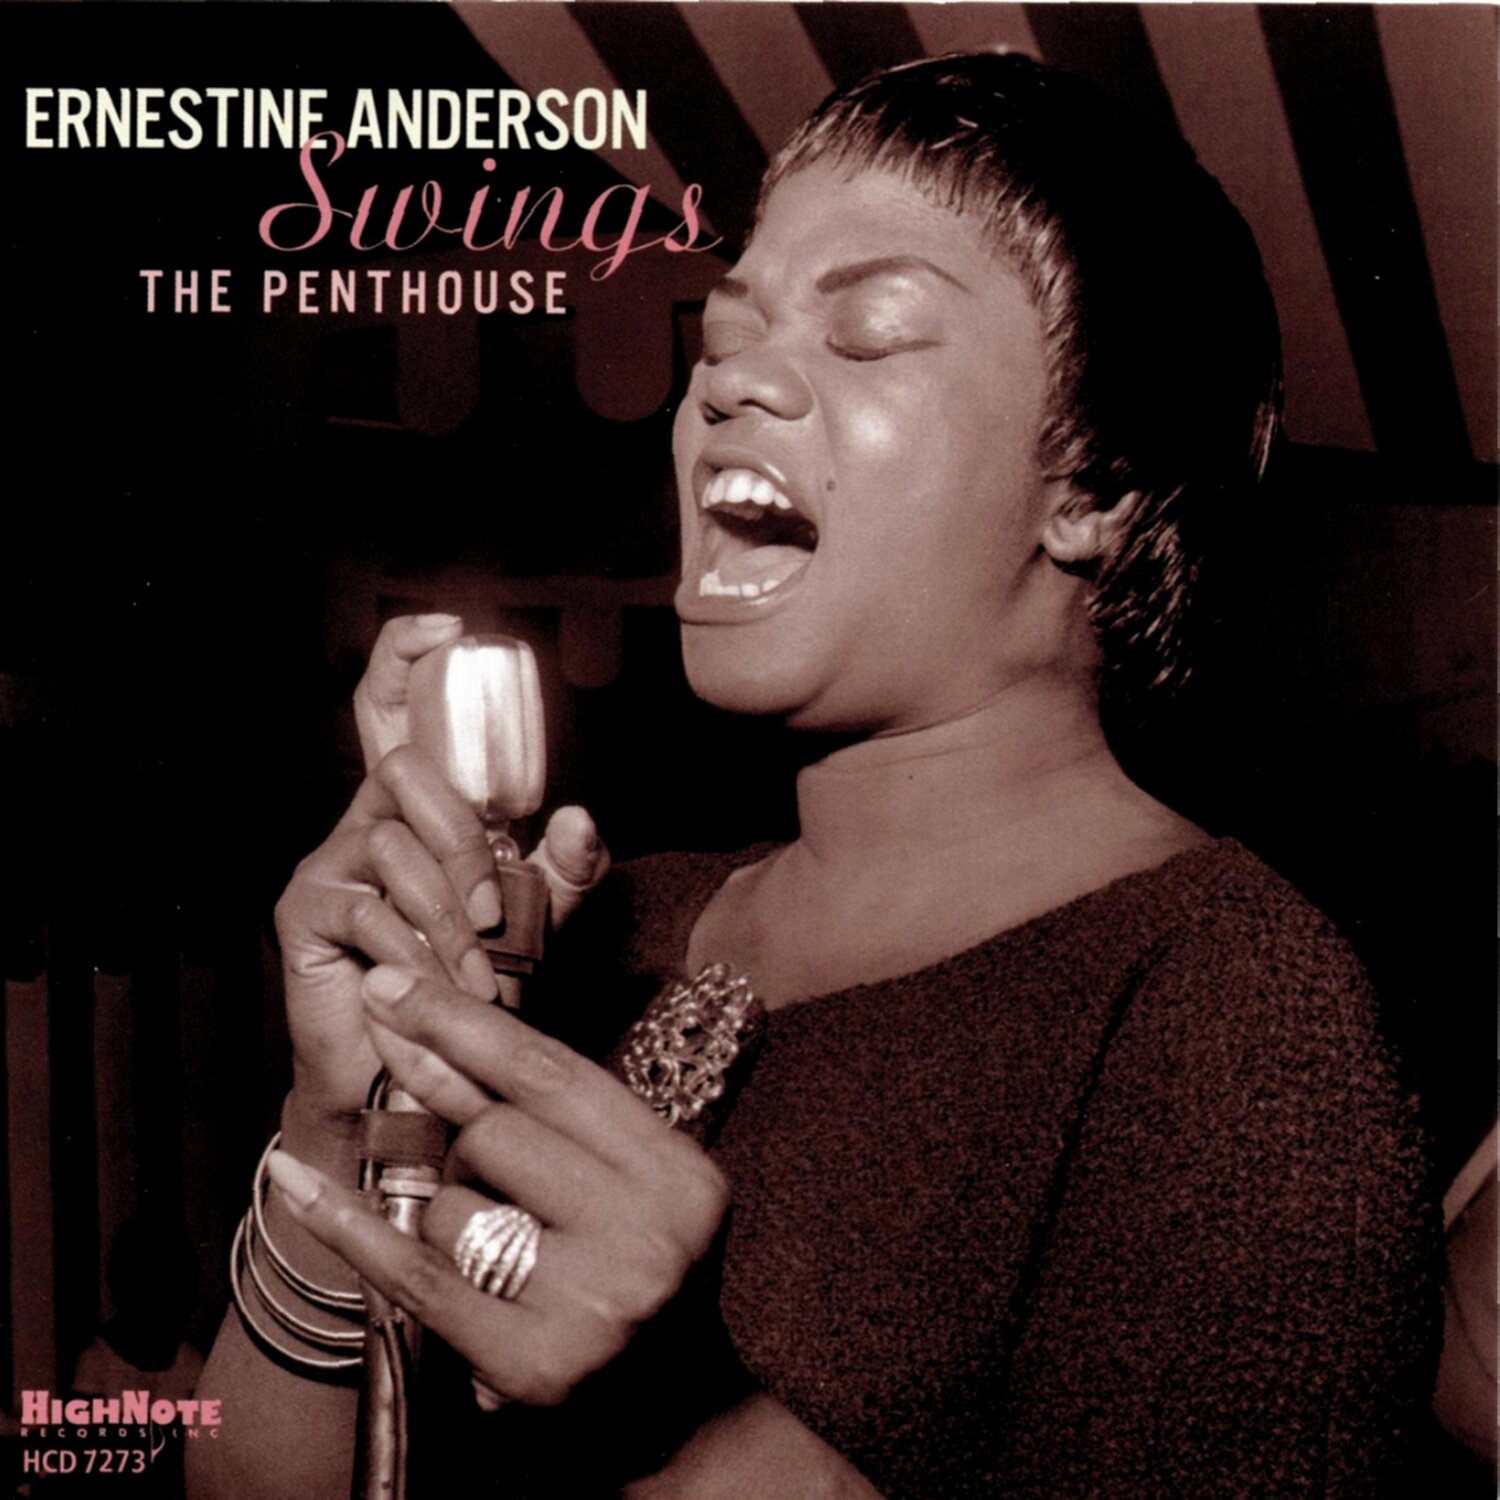 ERNESTINE ANDERSON - Swings The Penthouse